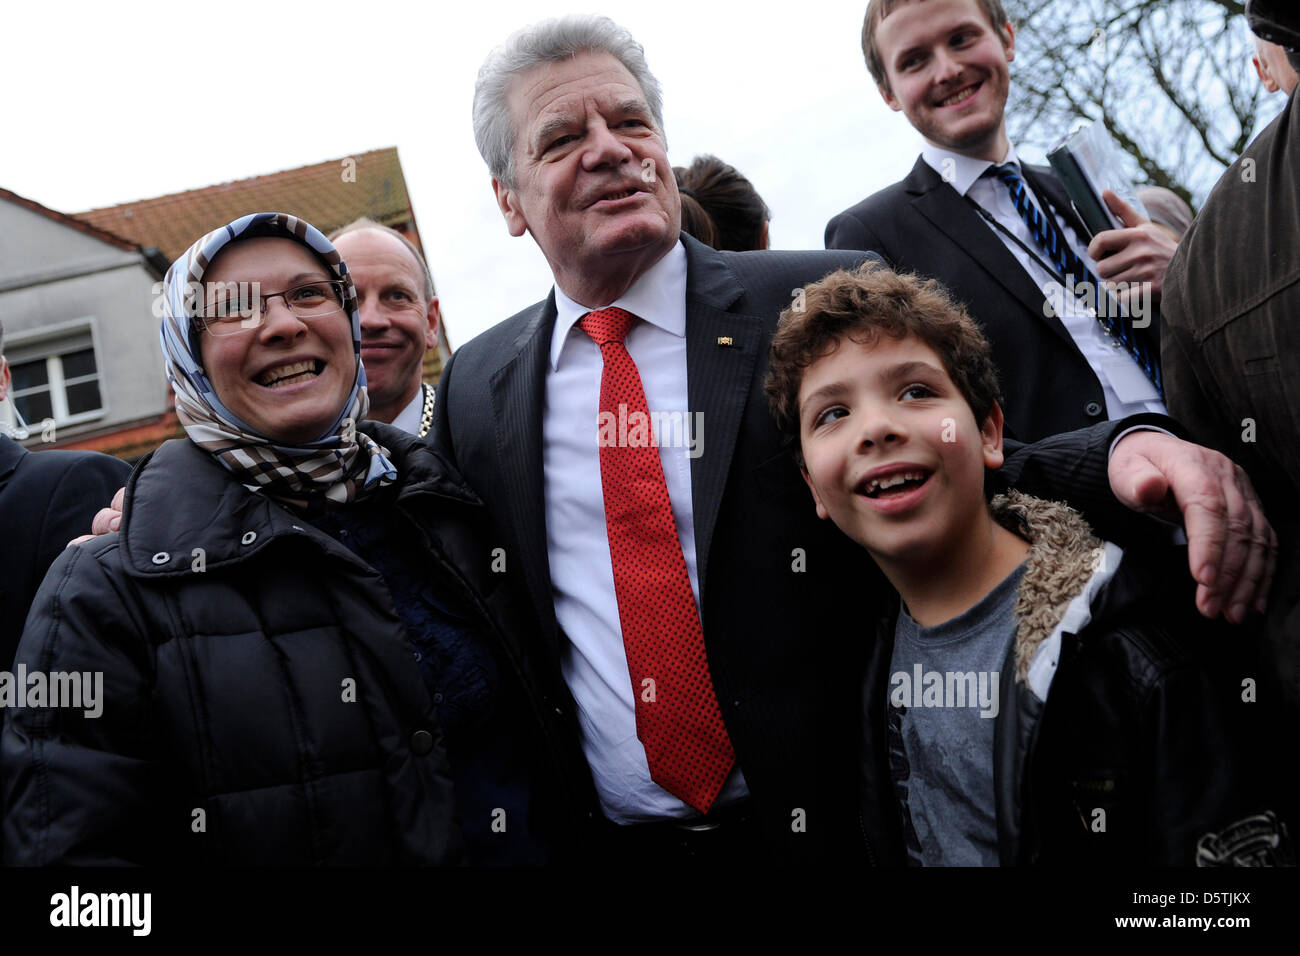 German federal president Joachim Gauck (c) talks to passersby during his inaugural visit to the state of North Rhine-Westphalia in Bottrop, Germany, 26 November 2012. Photo: Marius Becker Stock Photo